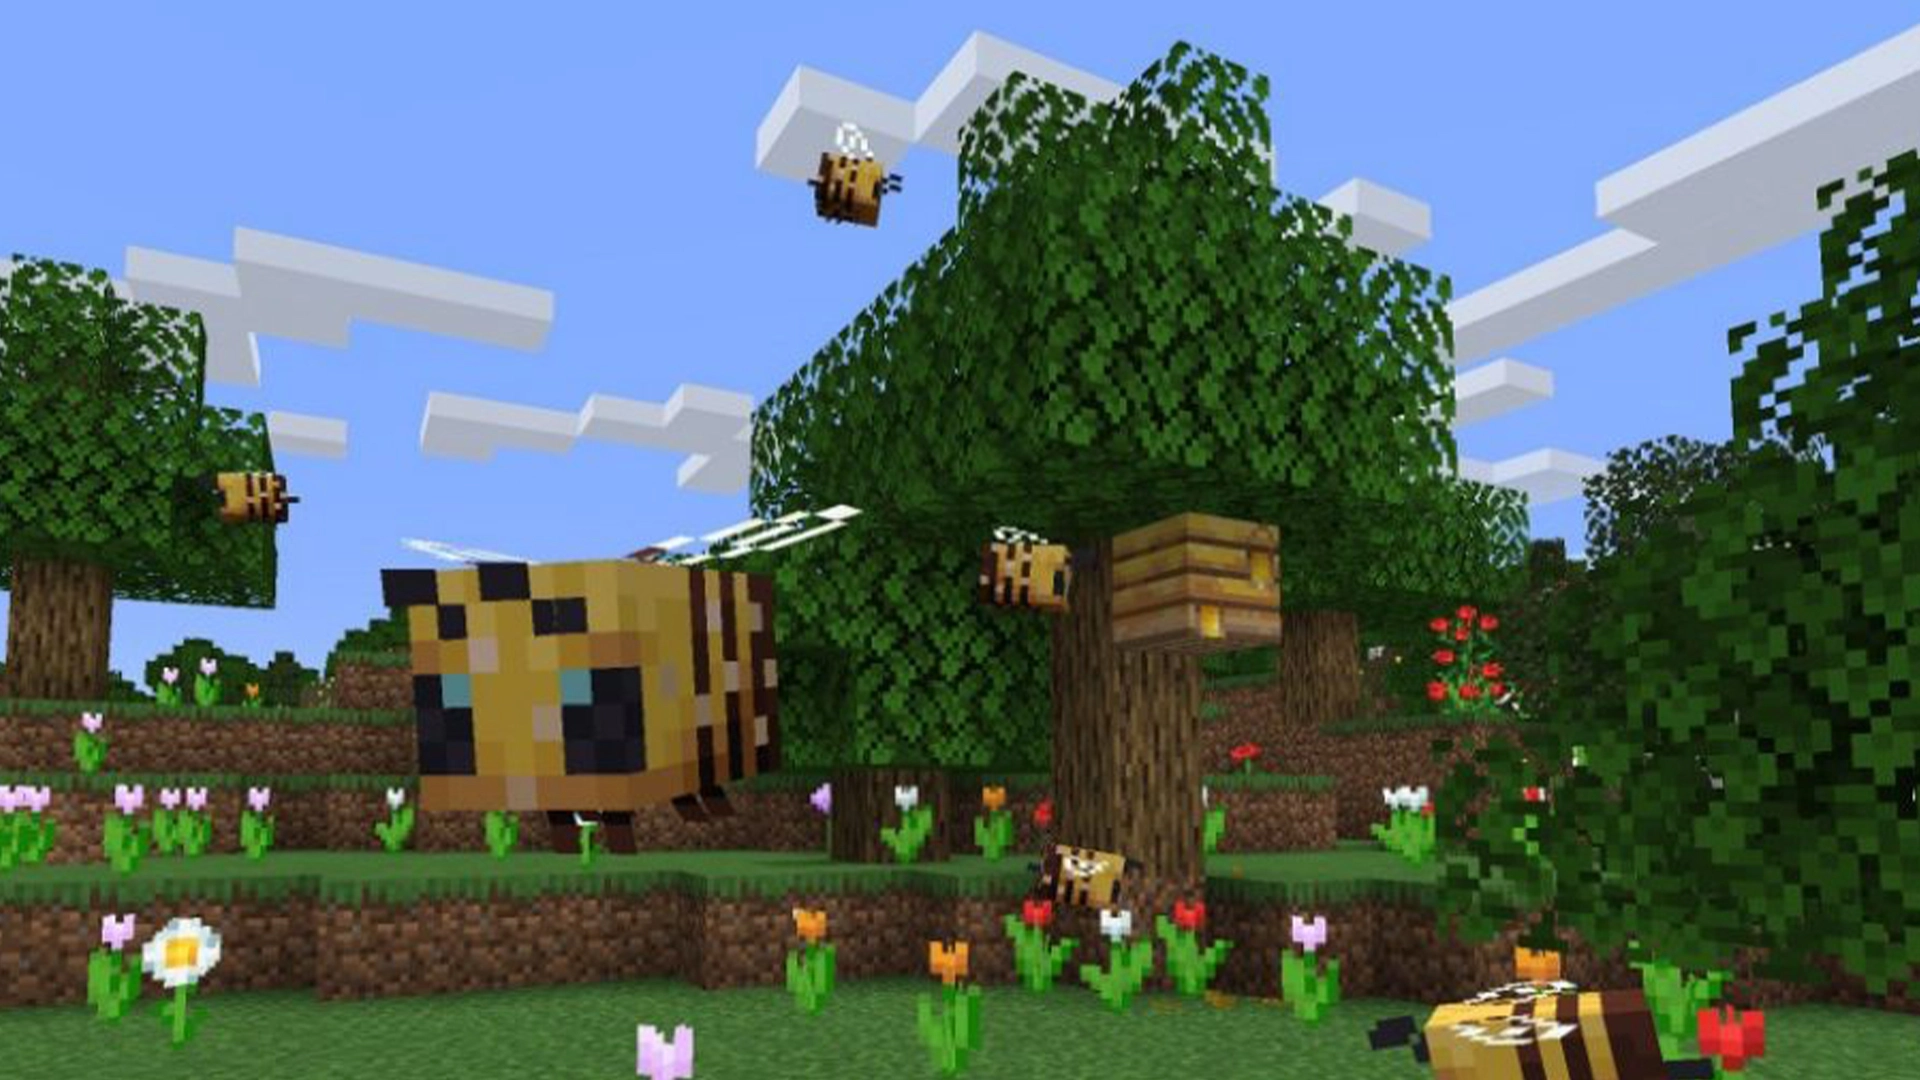 Minecraft’s latest Java update 1.15 is buzzing with bees